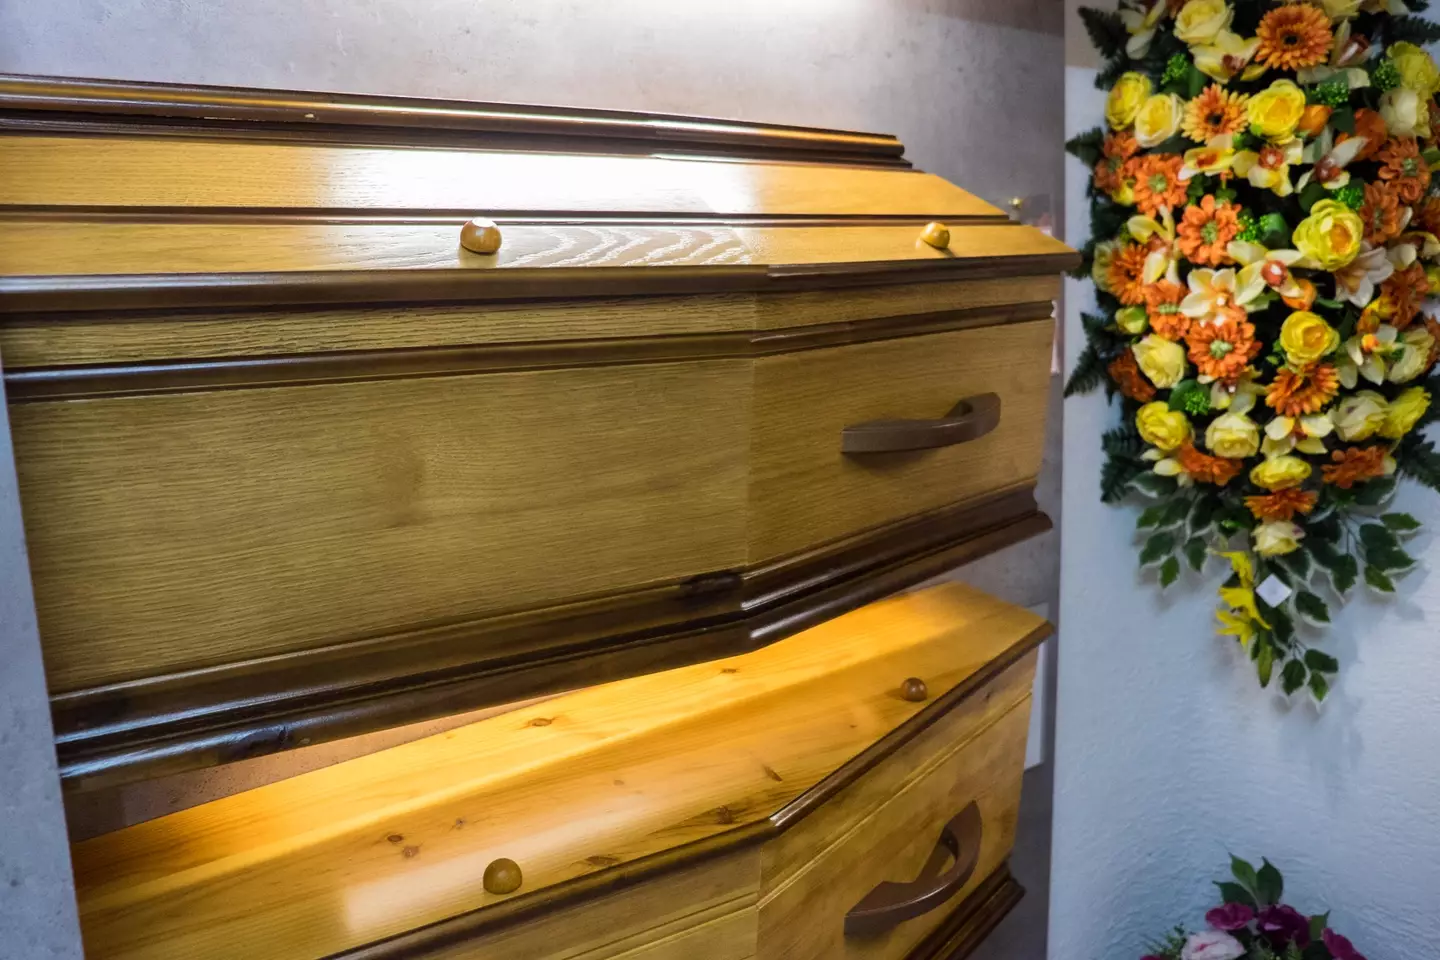 The best type of coffin is arguably a free coffin.